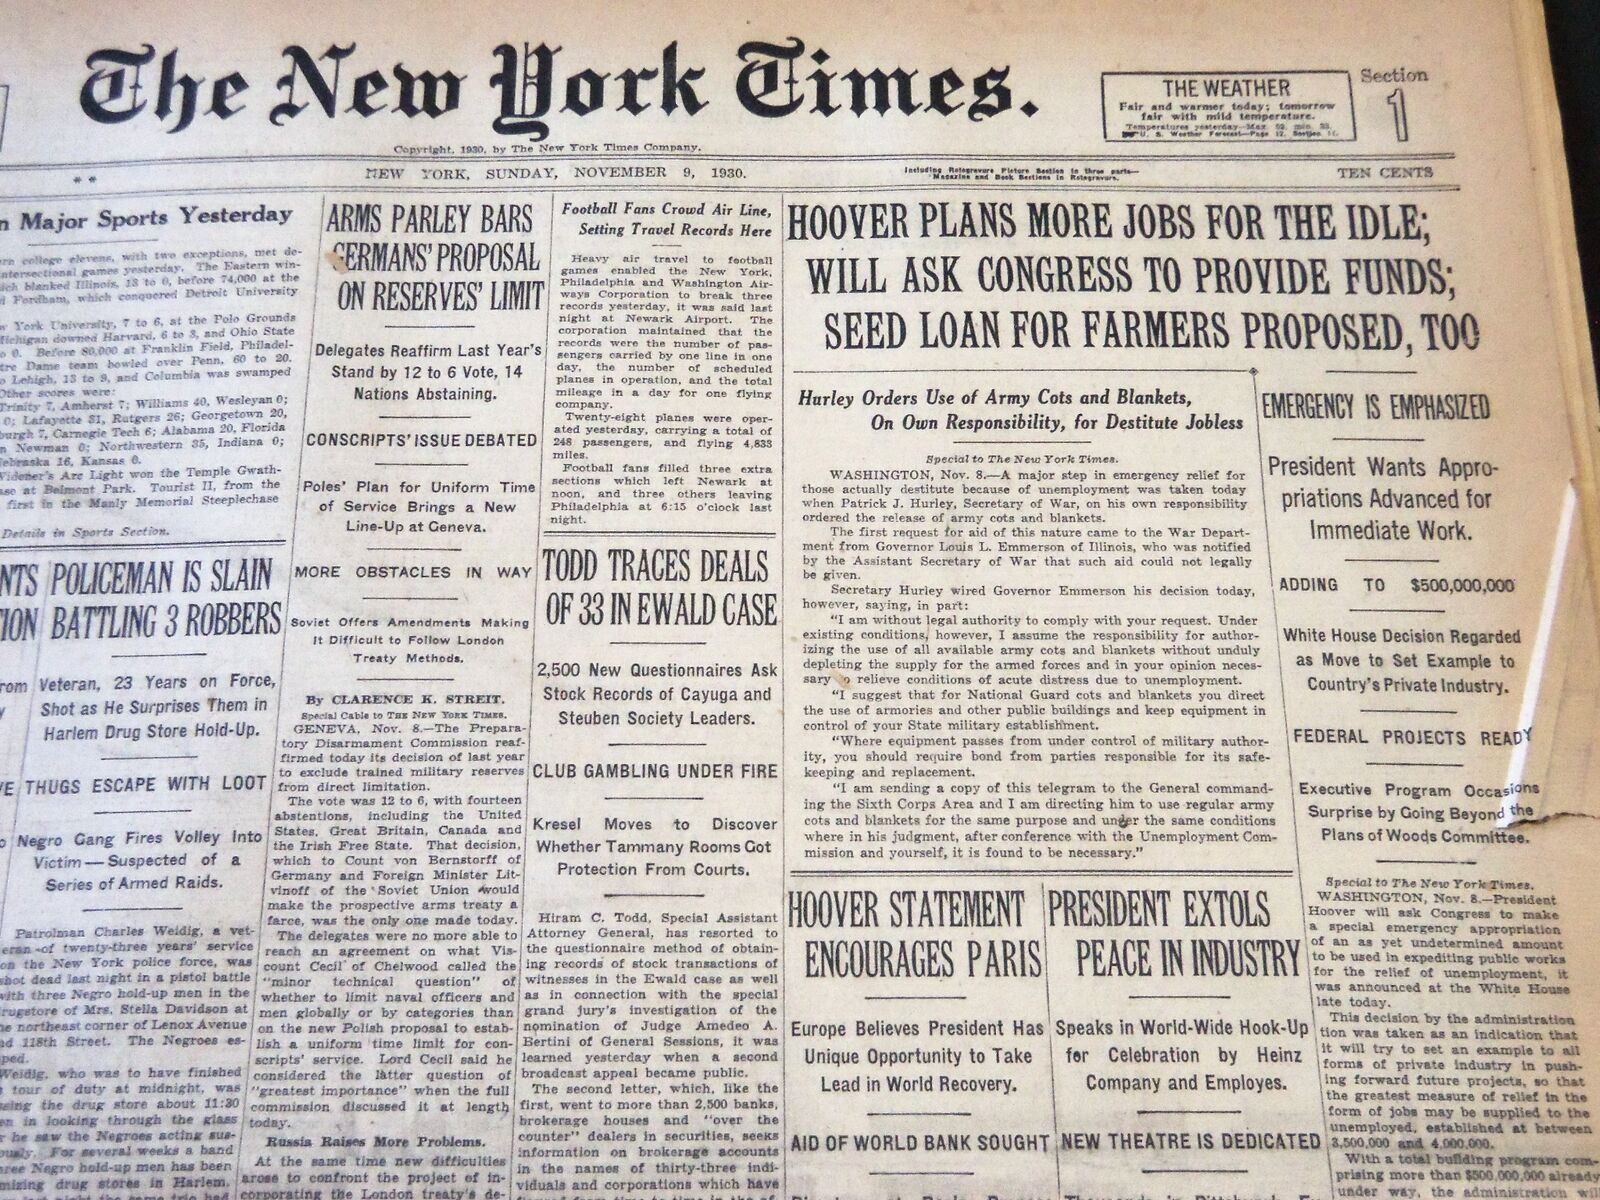 1930 NOVEMBER 9 NEW YORK TIMES - HOOVER PLANS MORE JOBS FOR THE IDLE - NT 5660